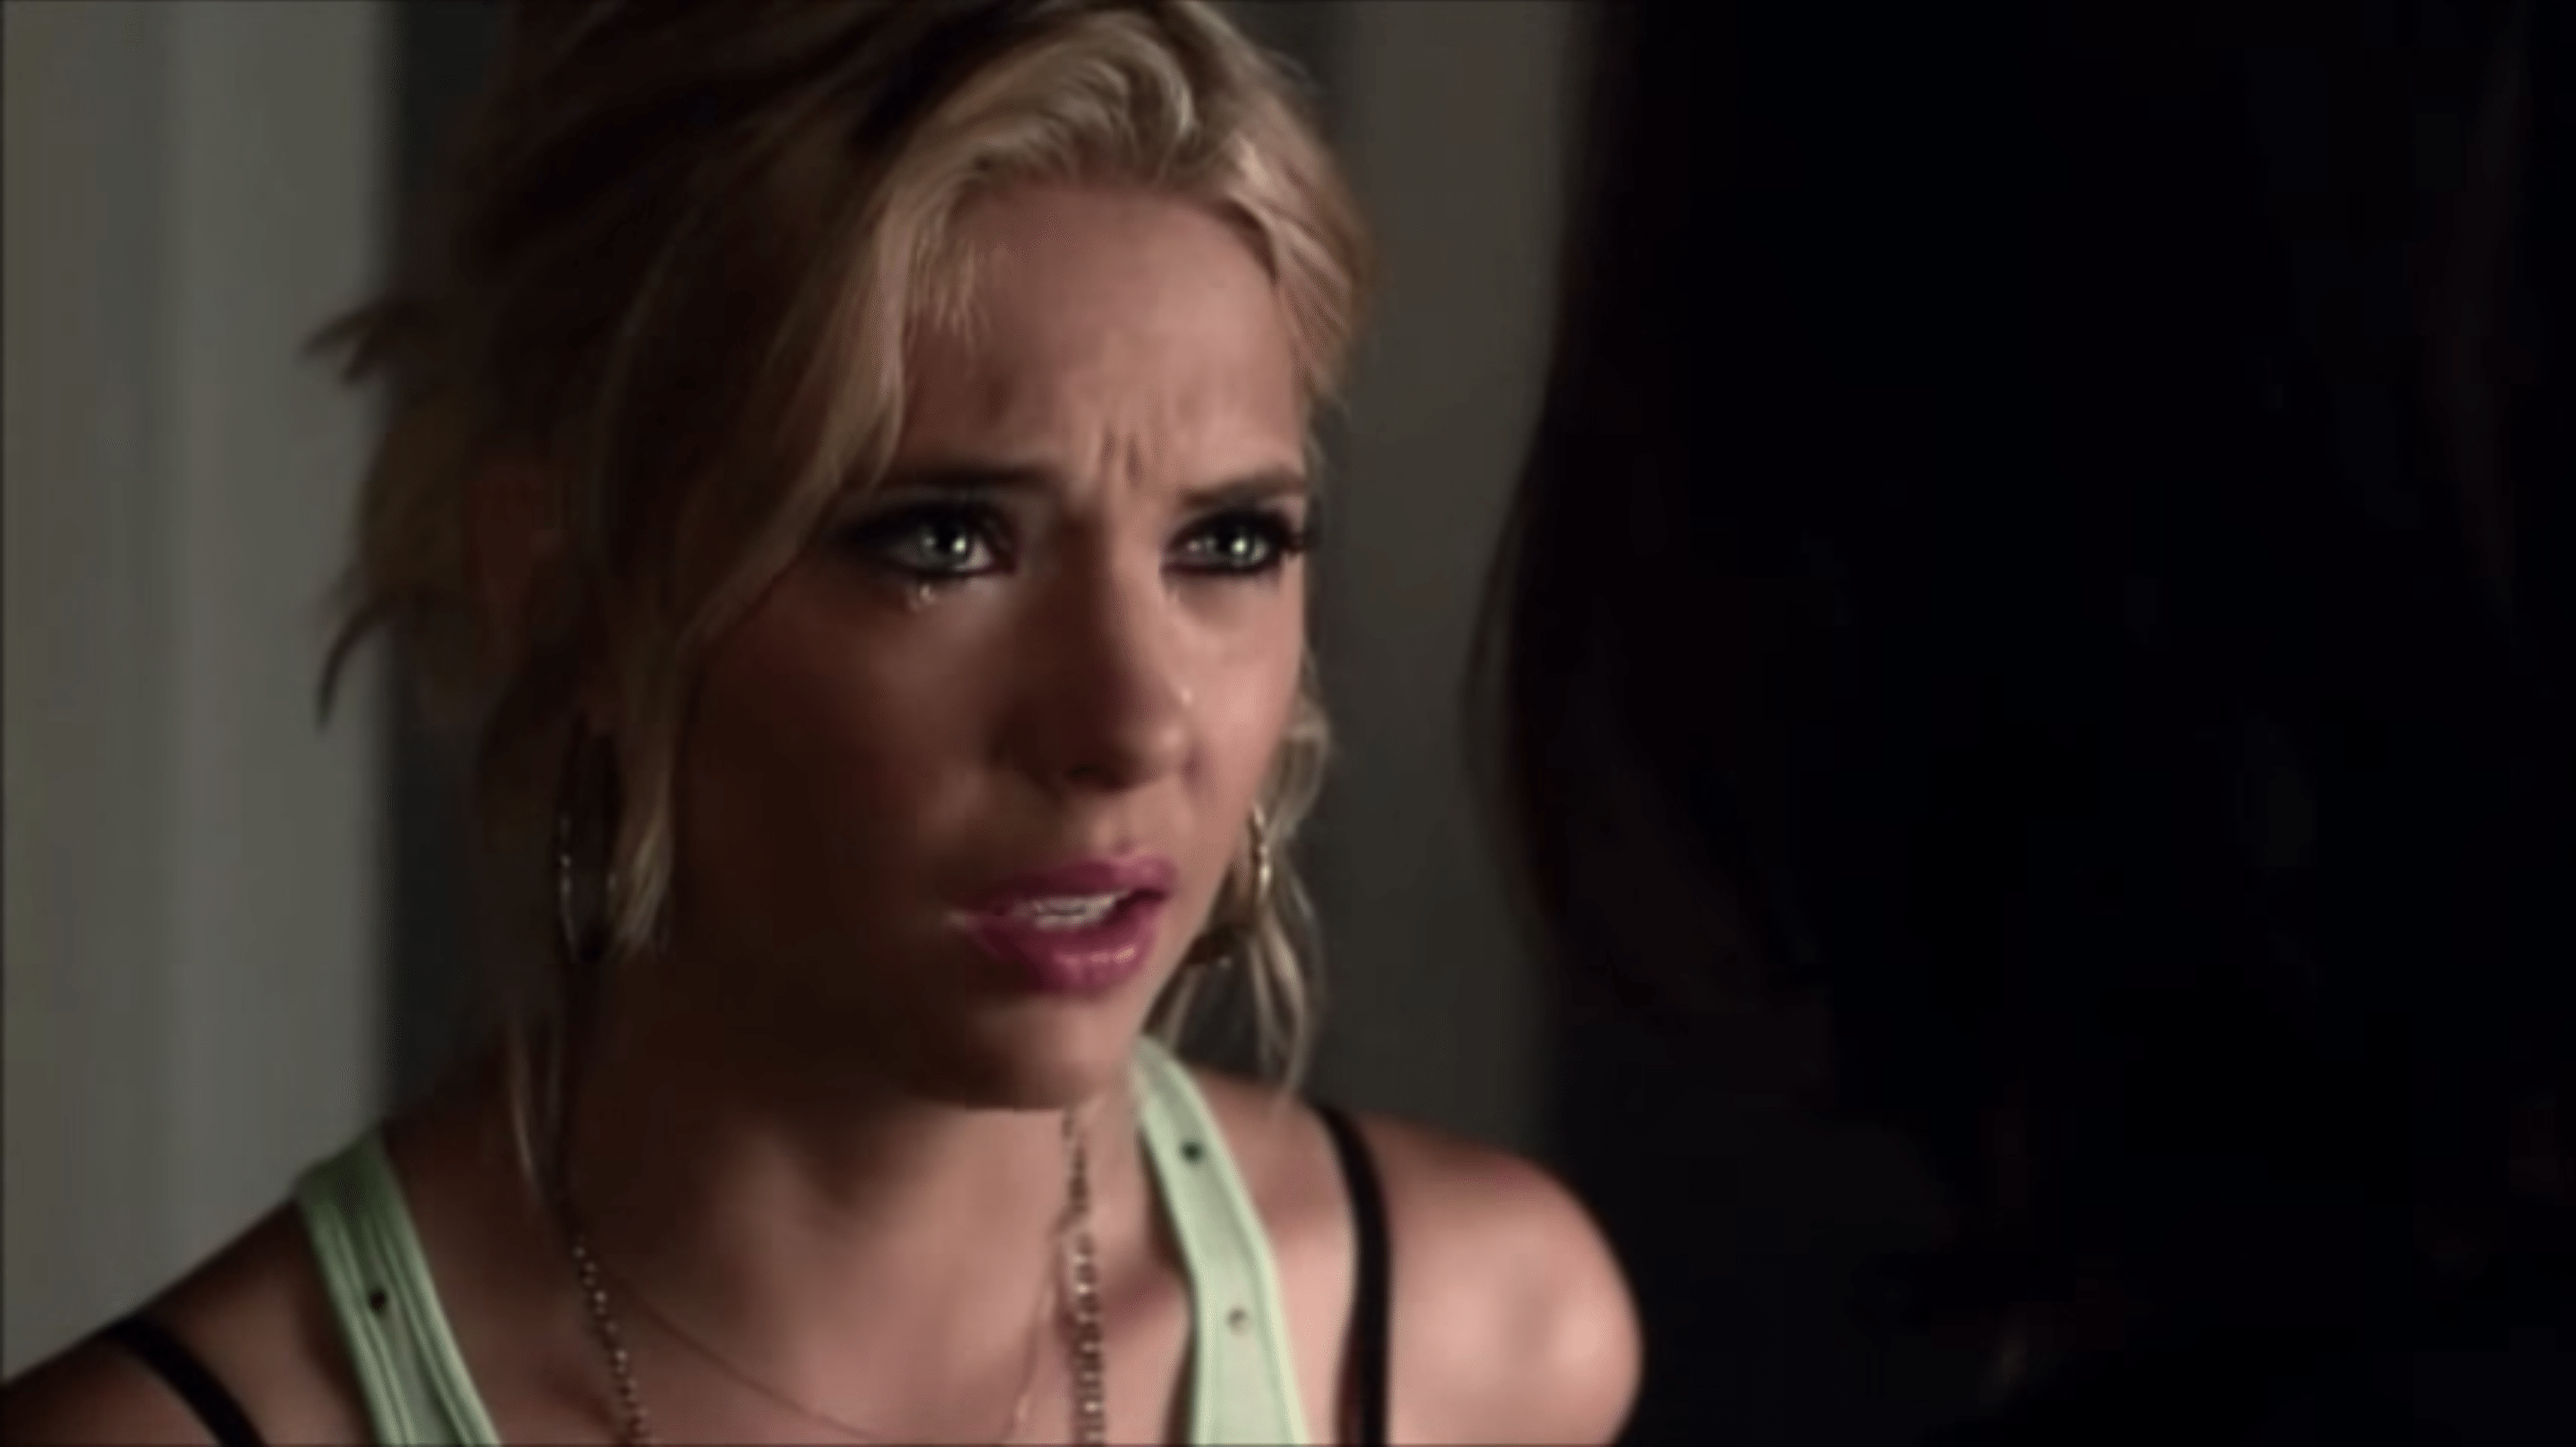 Why I'm breaking up with 'Pretty Little Liars